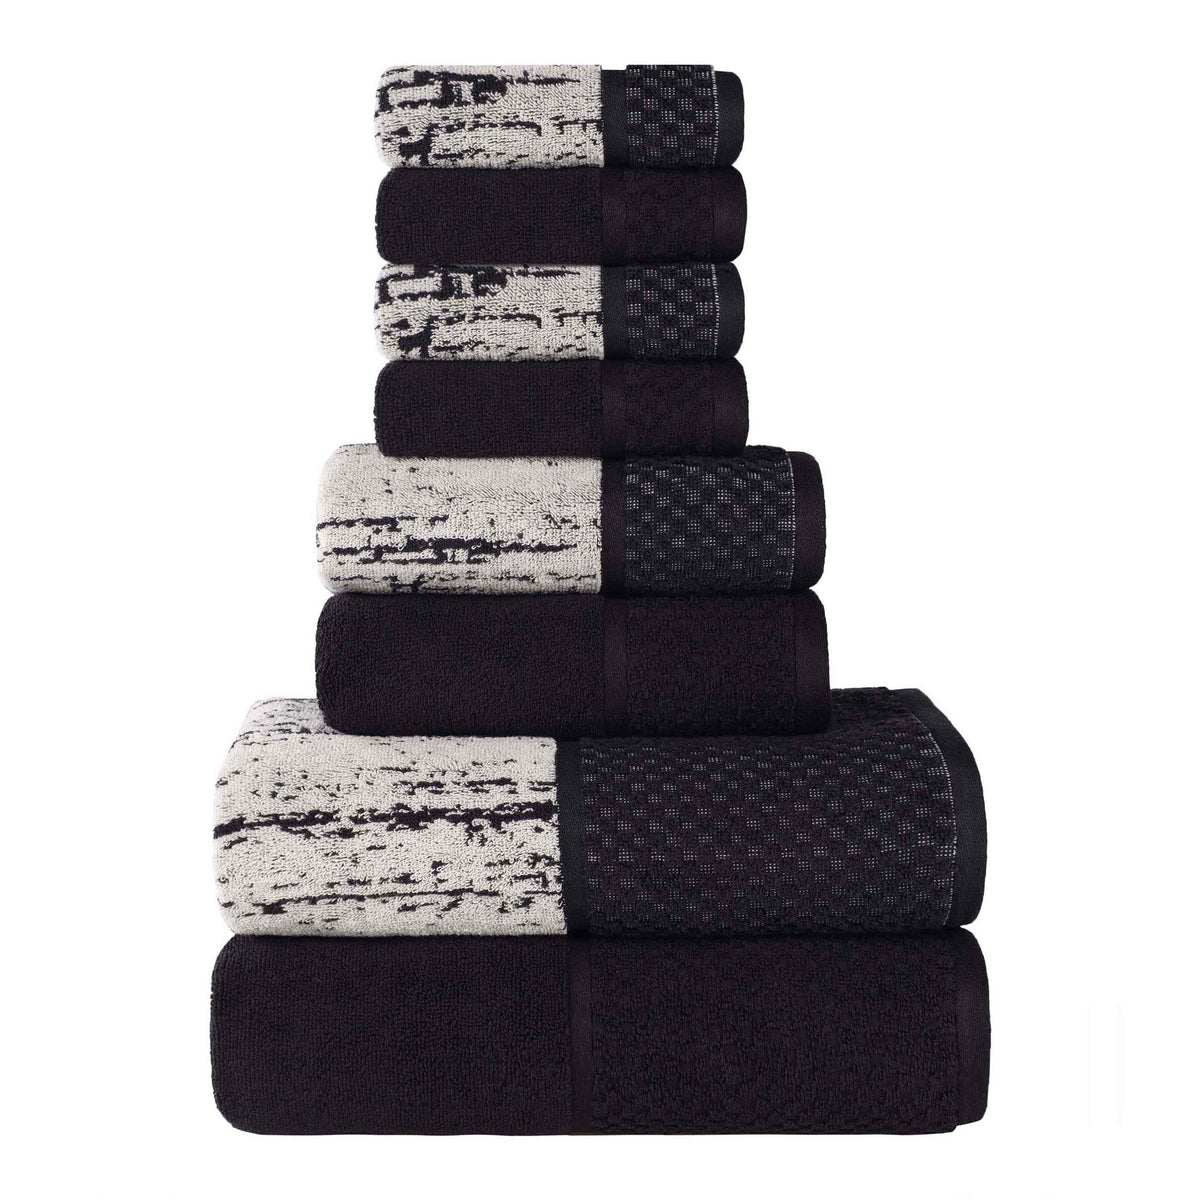 Lodie Cotton Jacquard Solid and Two-Toned 8 Piece Assorted Towel Set - Black-Ivory